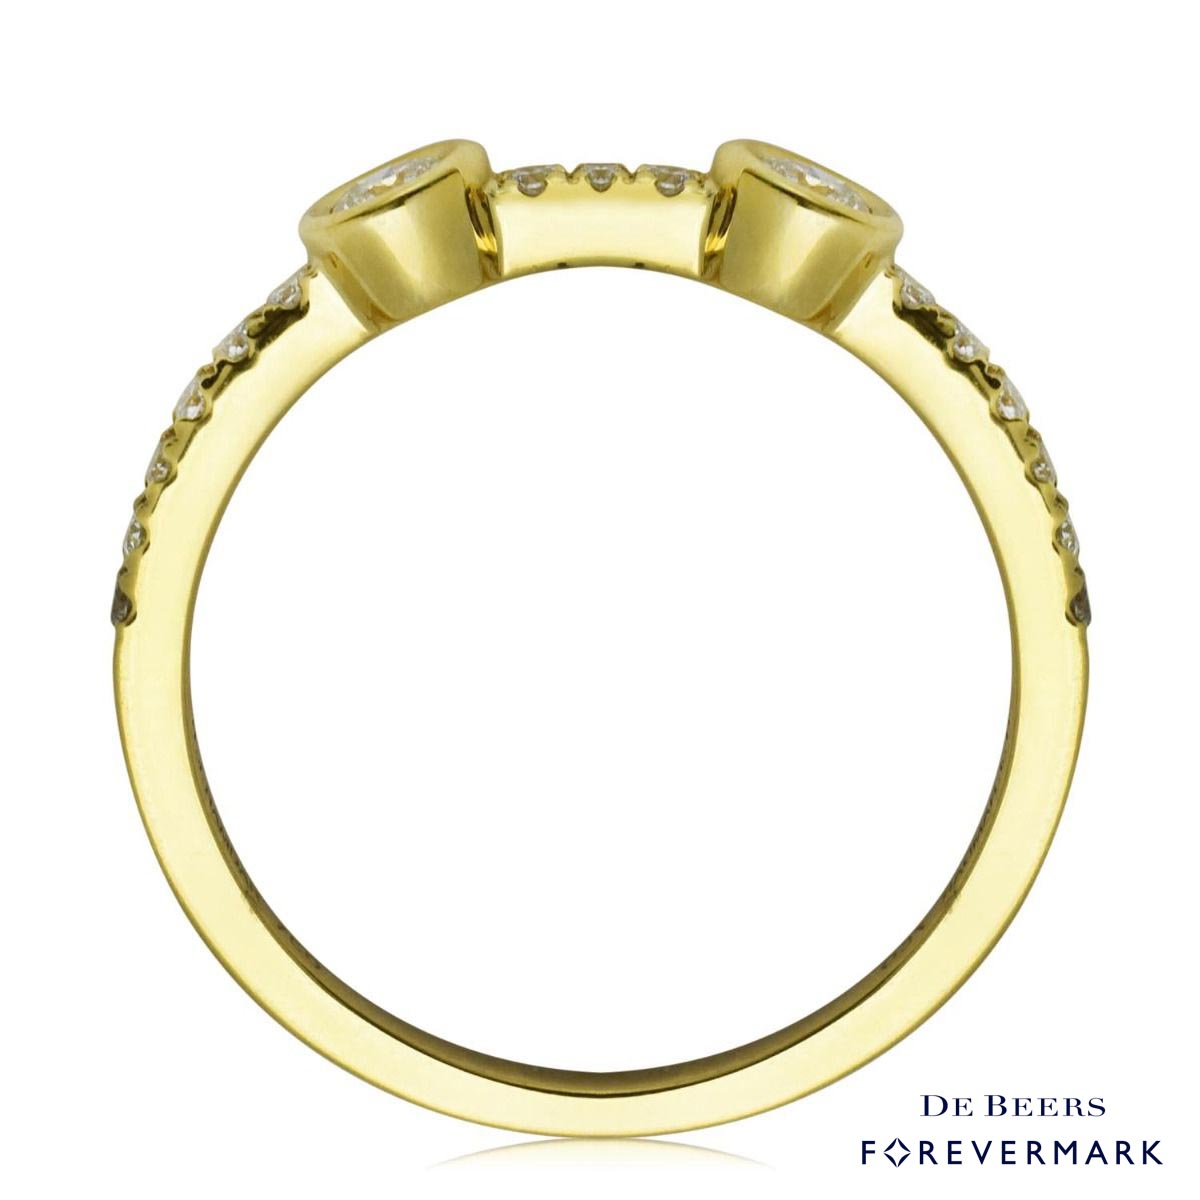 De Beers Forevermark Tribute Collection Diamond Stackable Ring in 18kt Yellow Gold (1/2ct tw)